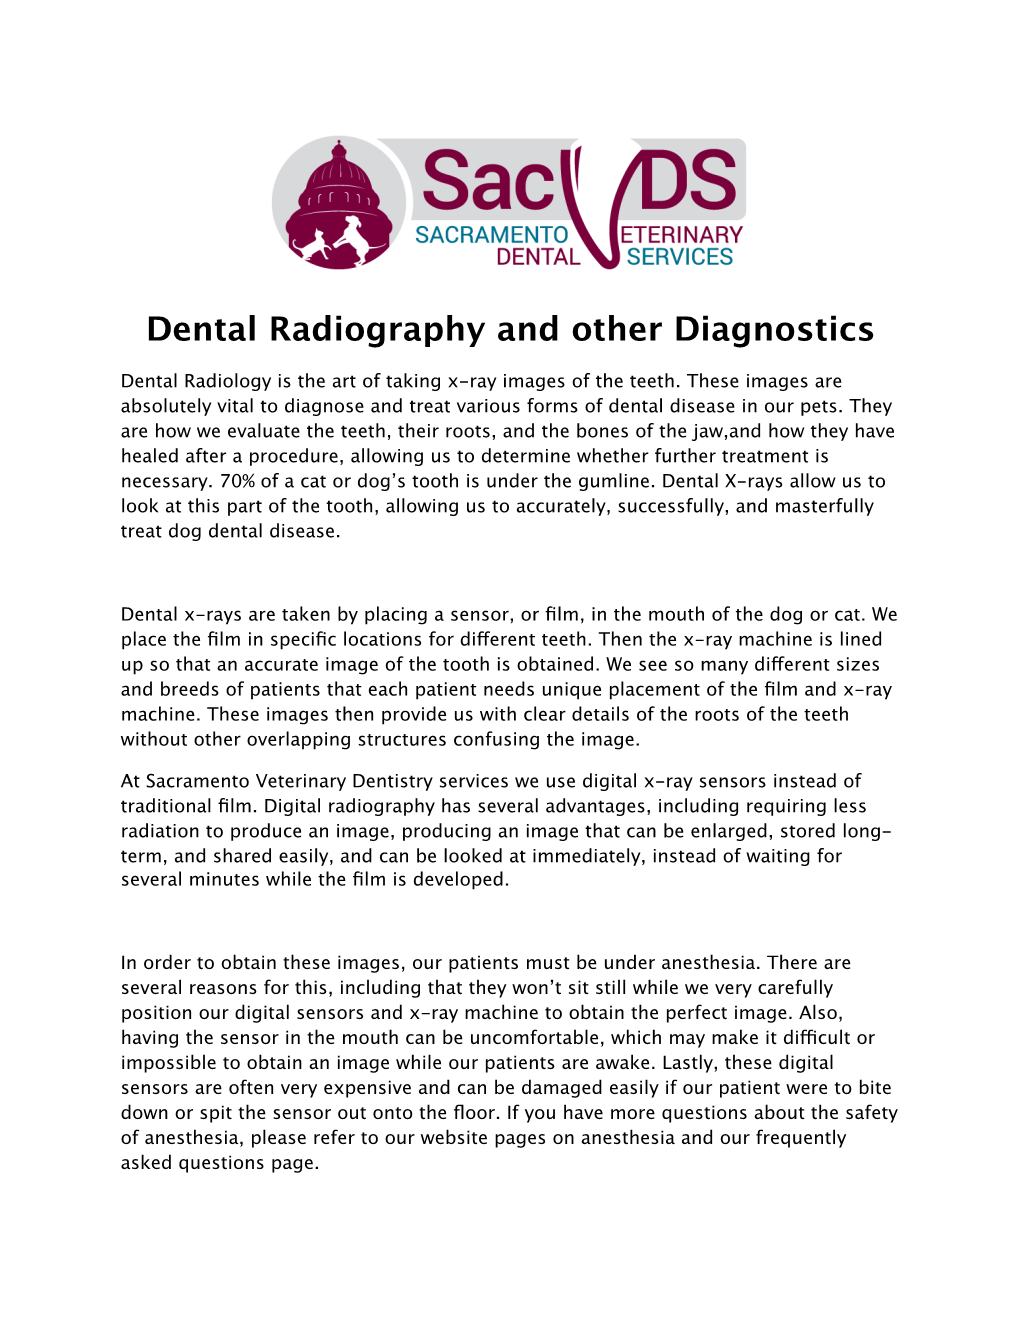 Dental Radiography and Other Diagnostics